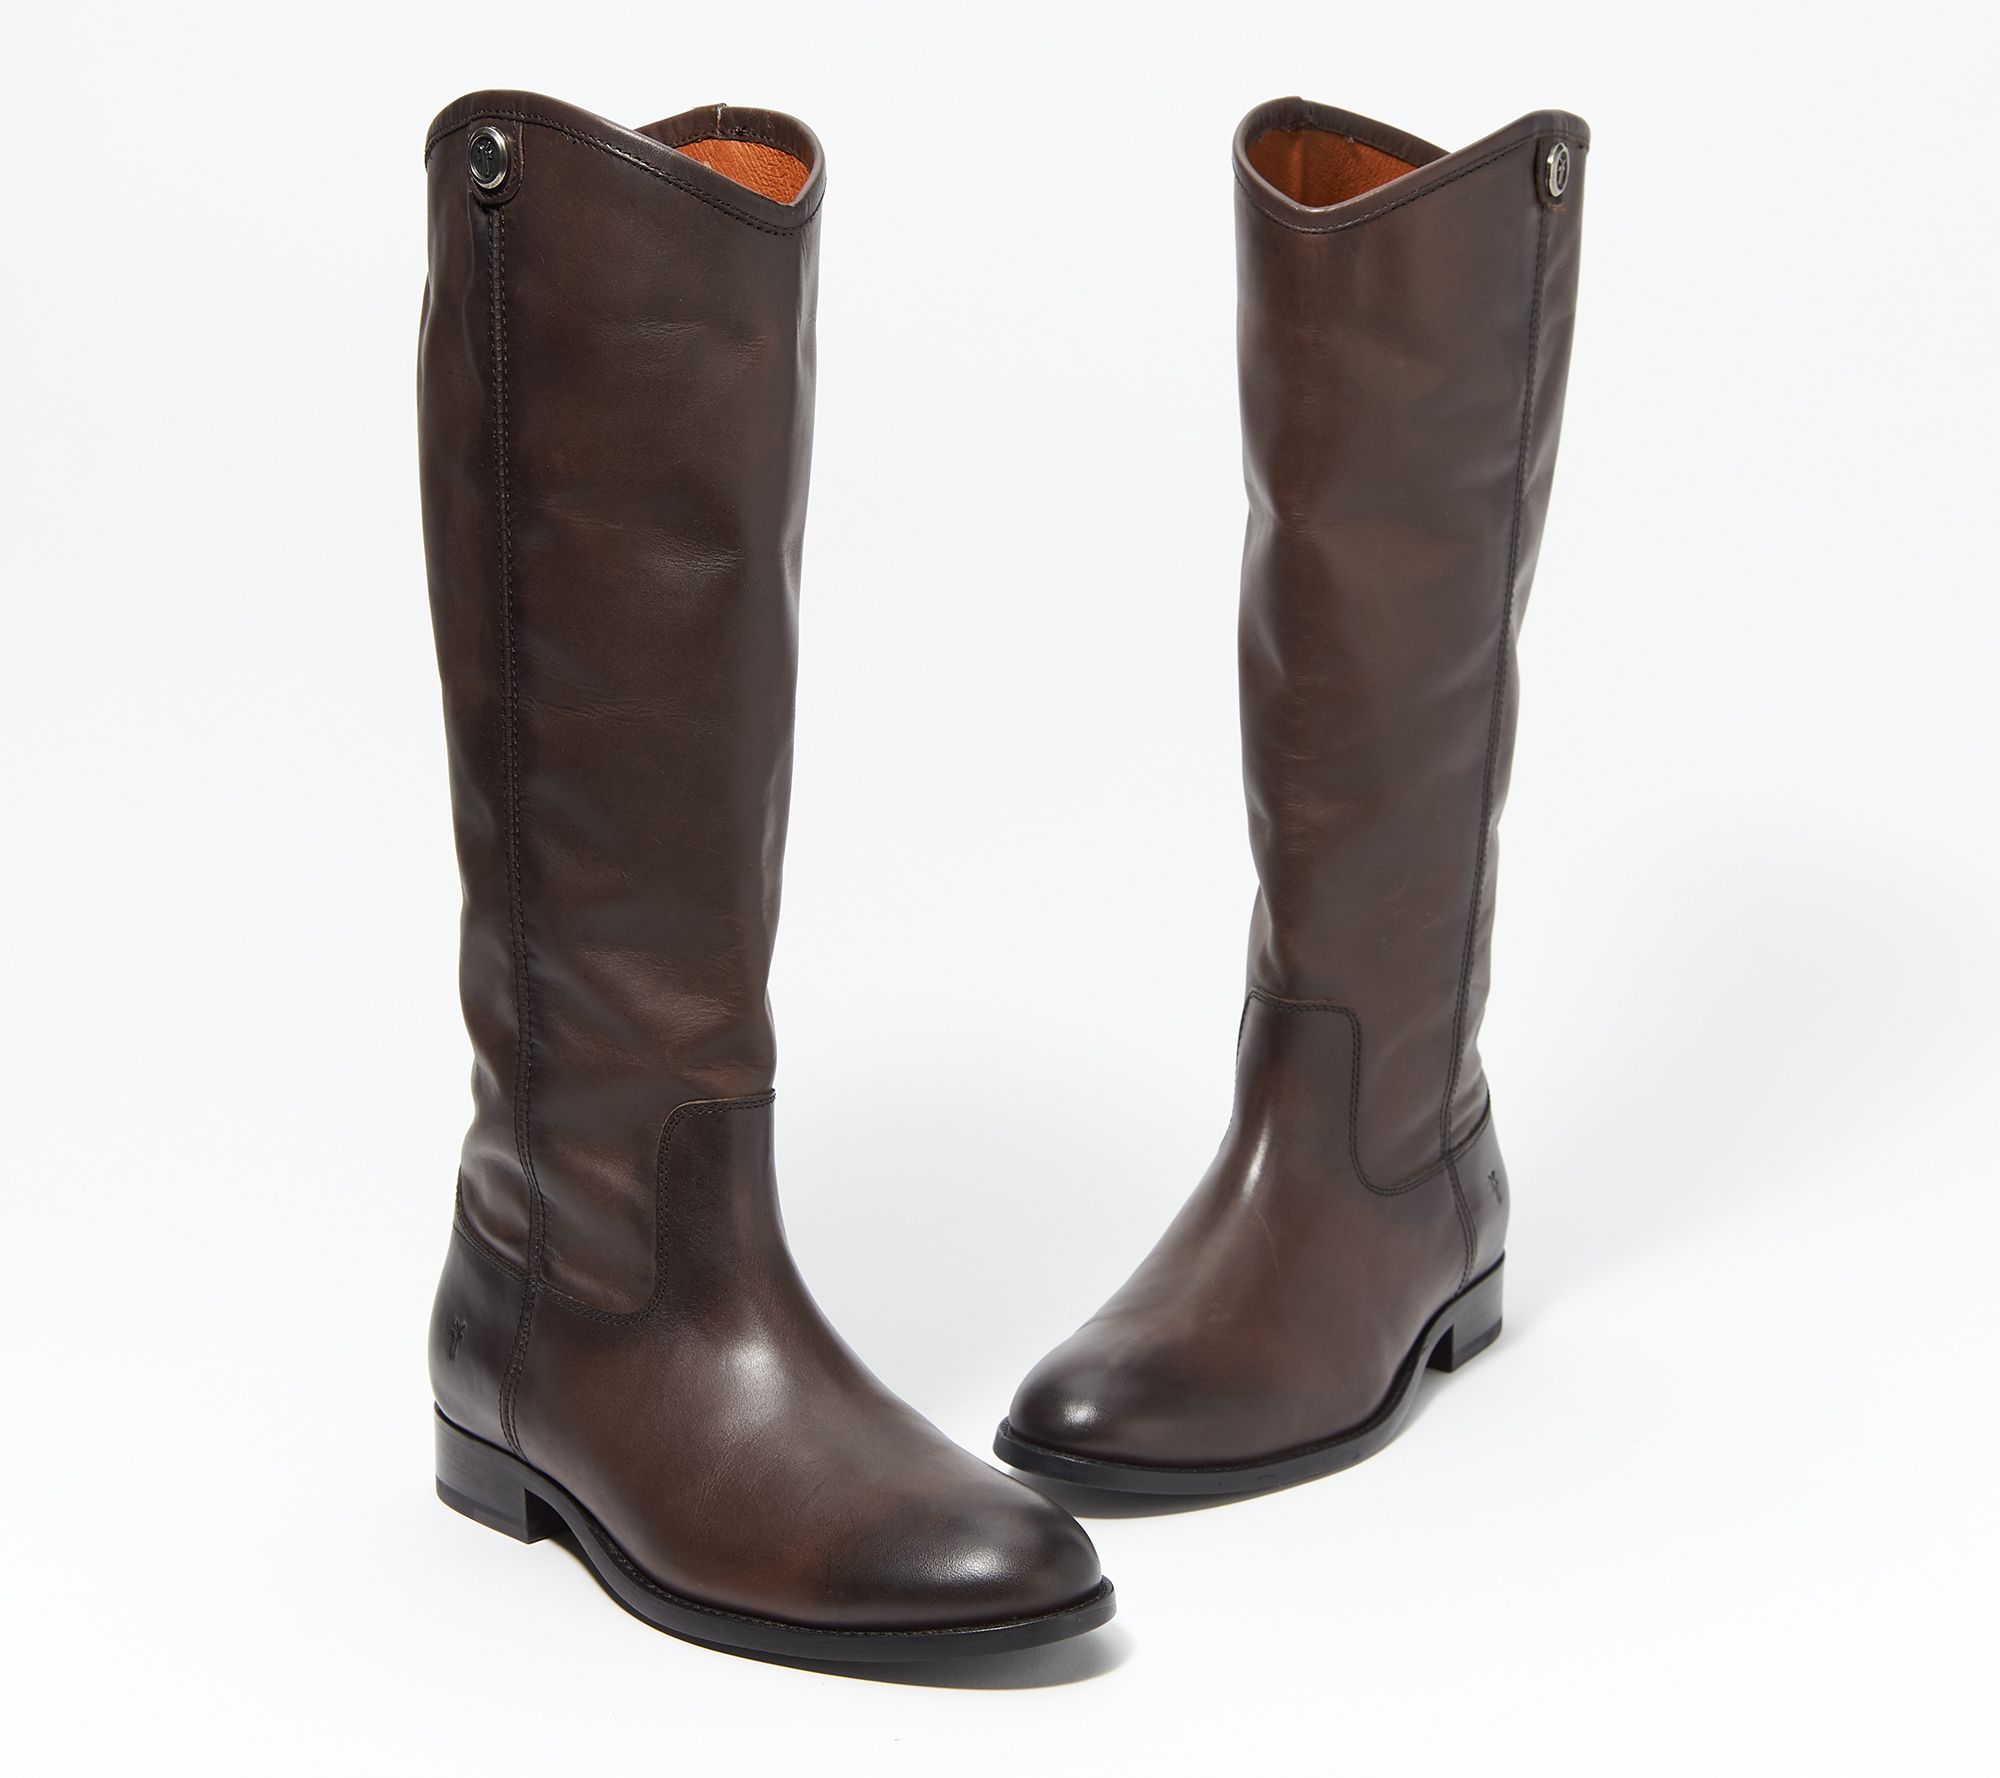 melissa knee high leather boot frye